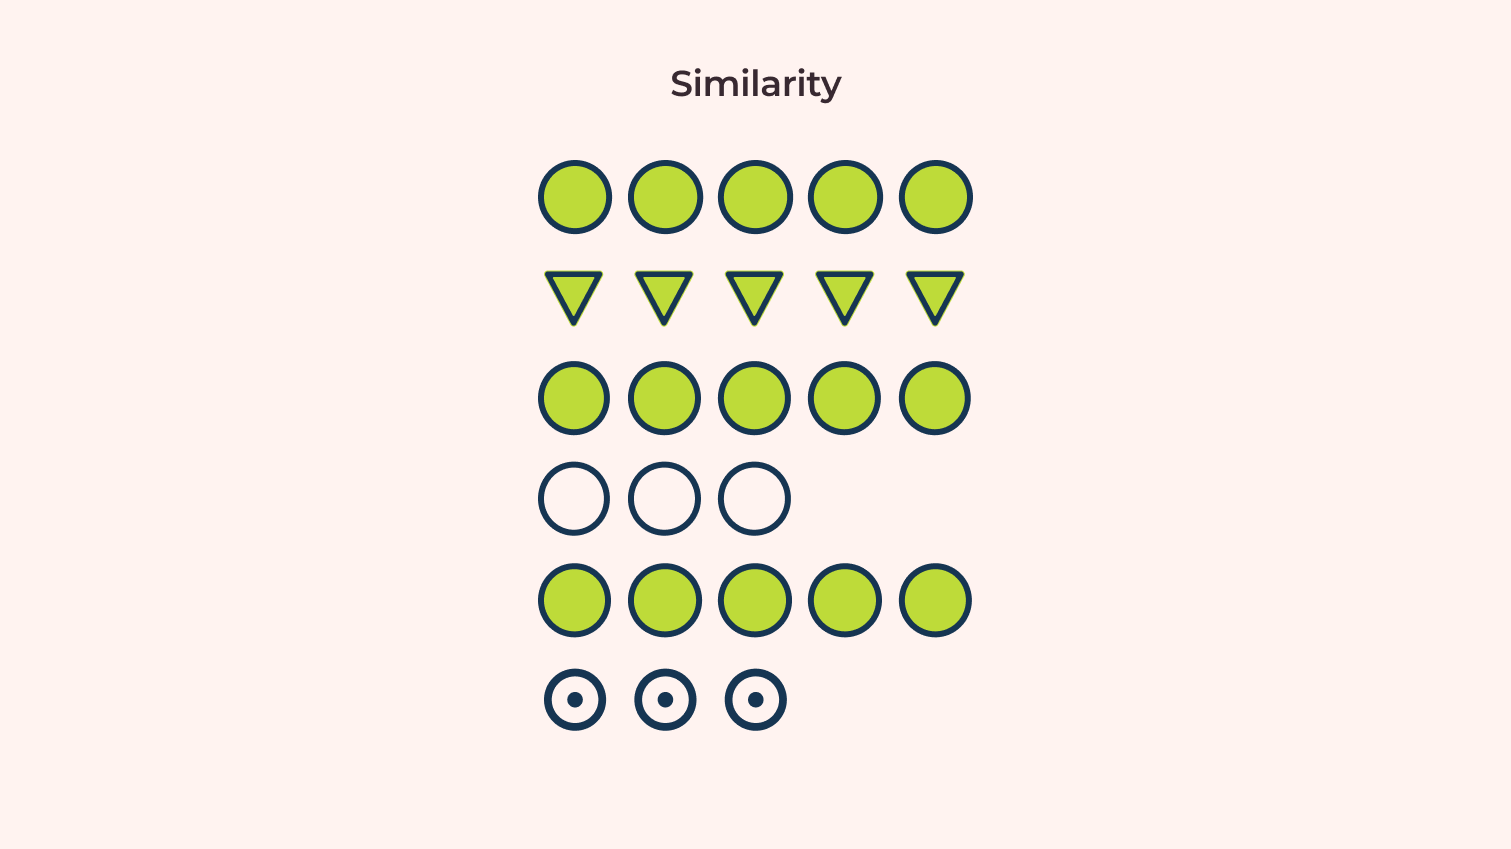 gestalt principles of grouping similarity of size